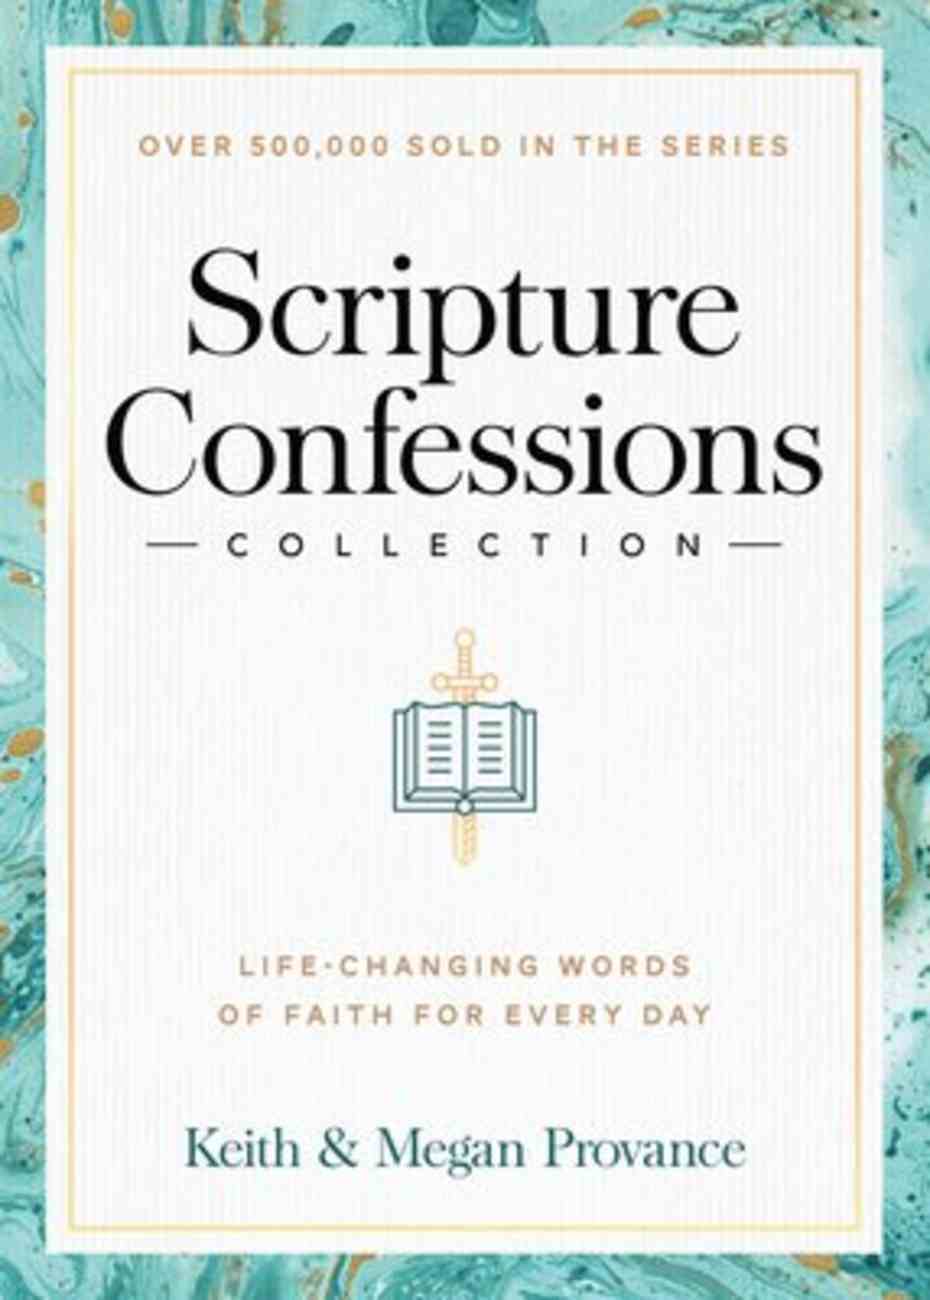 Scripture Confessions Collection: Life-Changing Words of Faith For Every Day Hardback